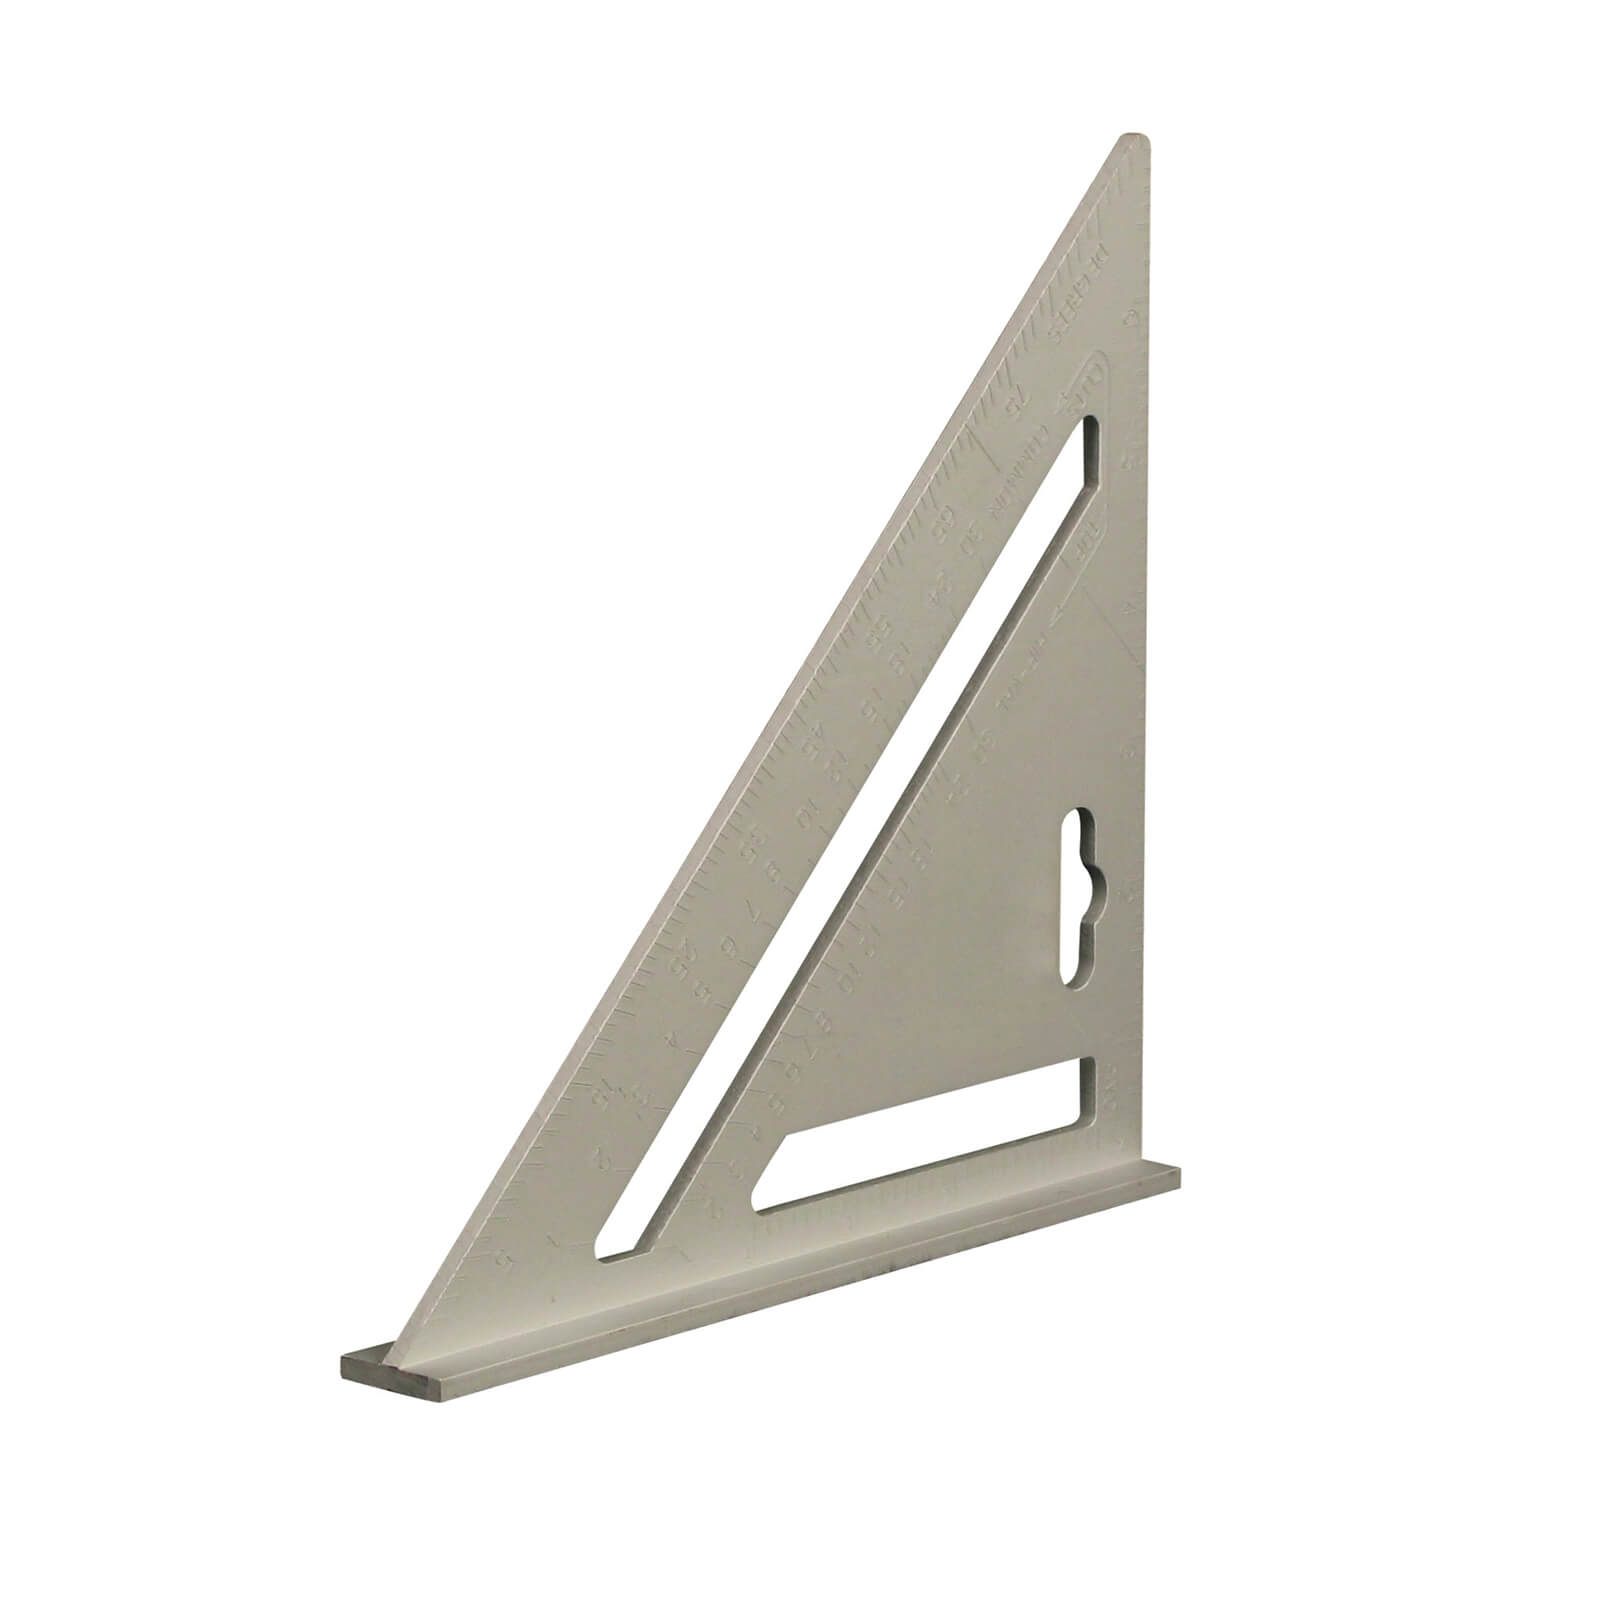 Silverline Heavy Duty Aluminium Roofing Rafter Square 7"